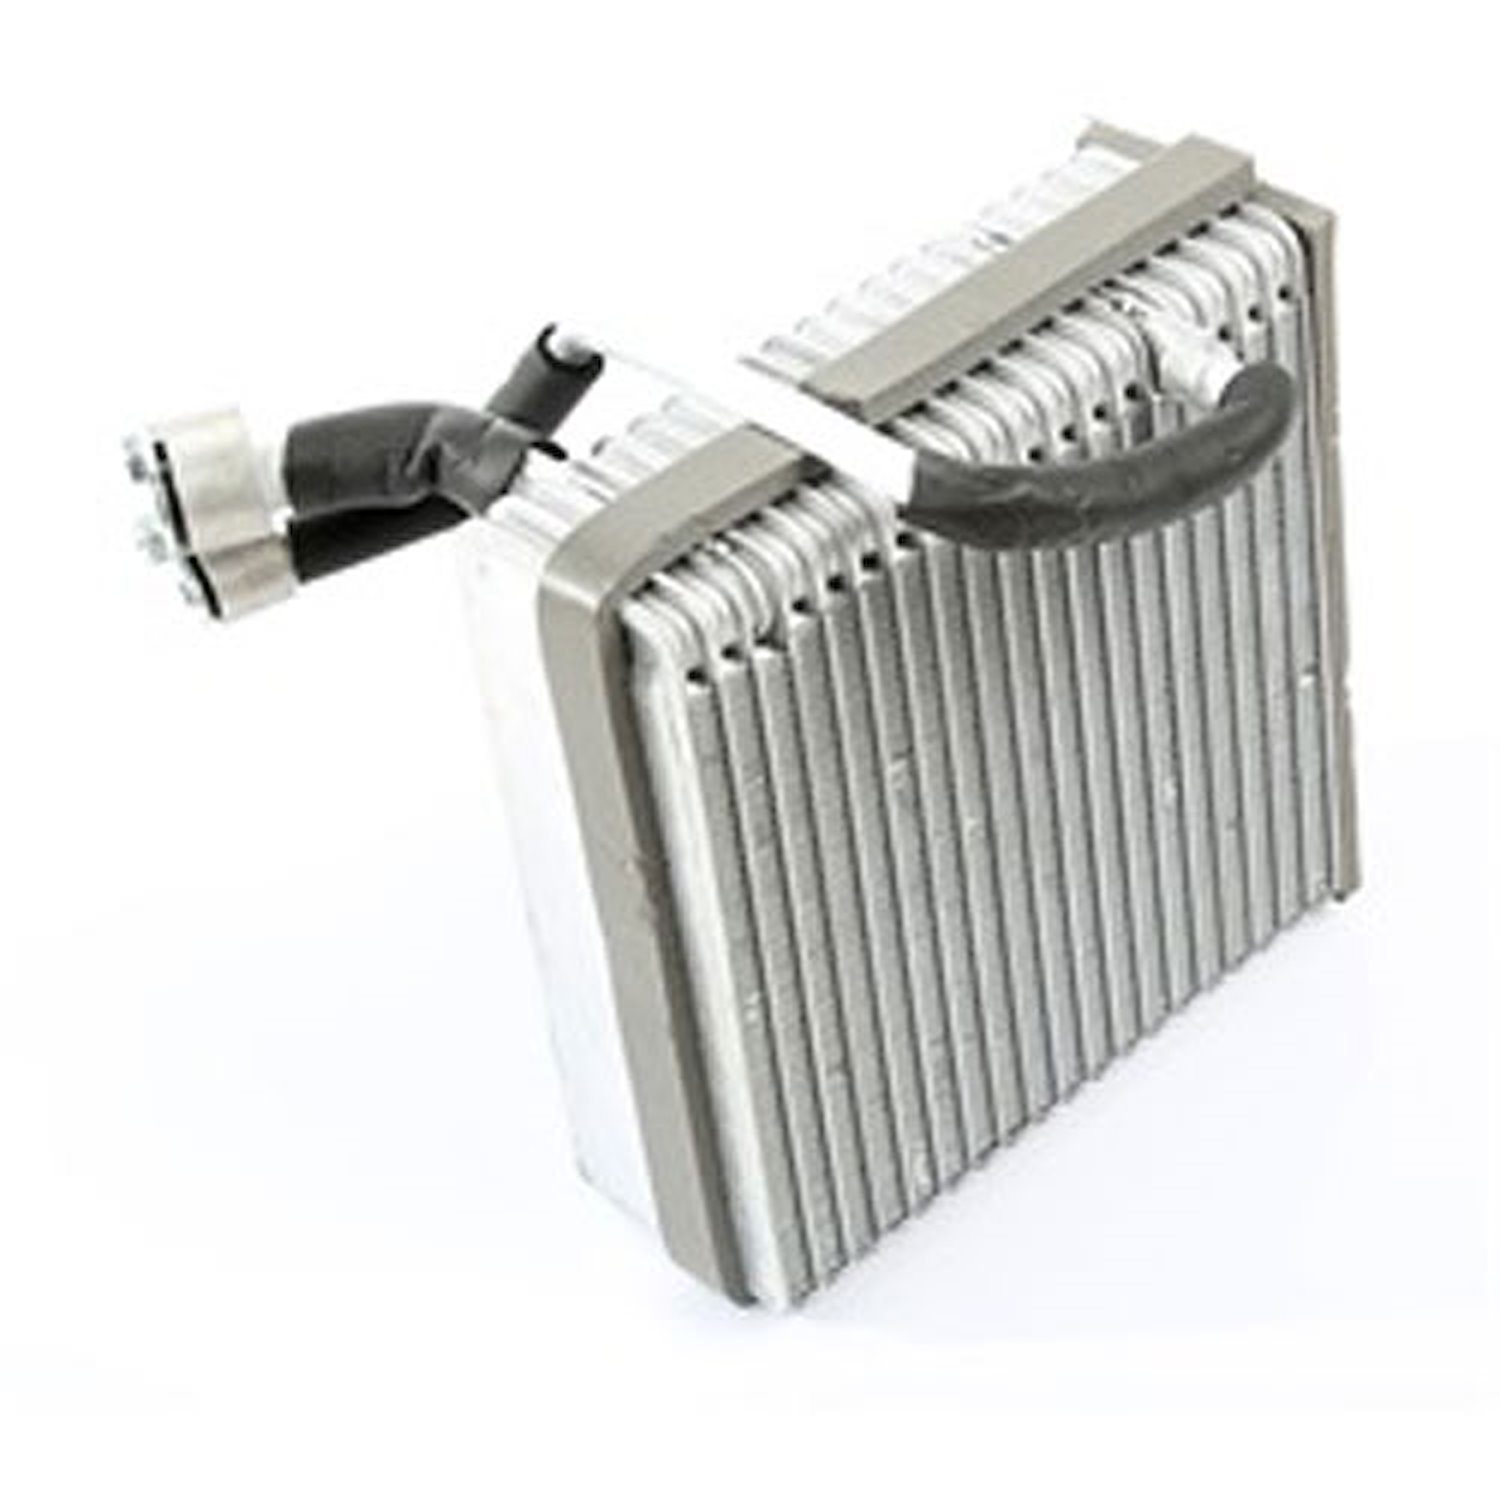 This AC evaporator core from Omix-ADA fits 07-11 Jeep Wranglers.